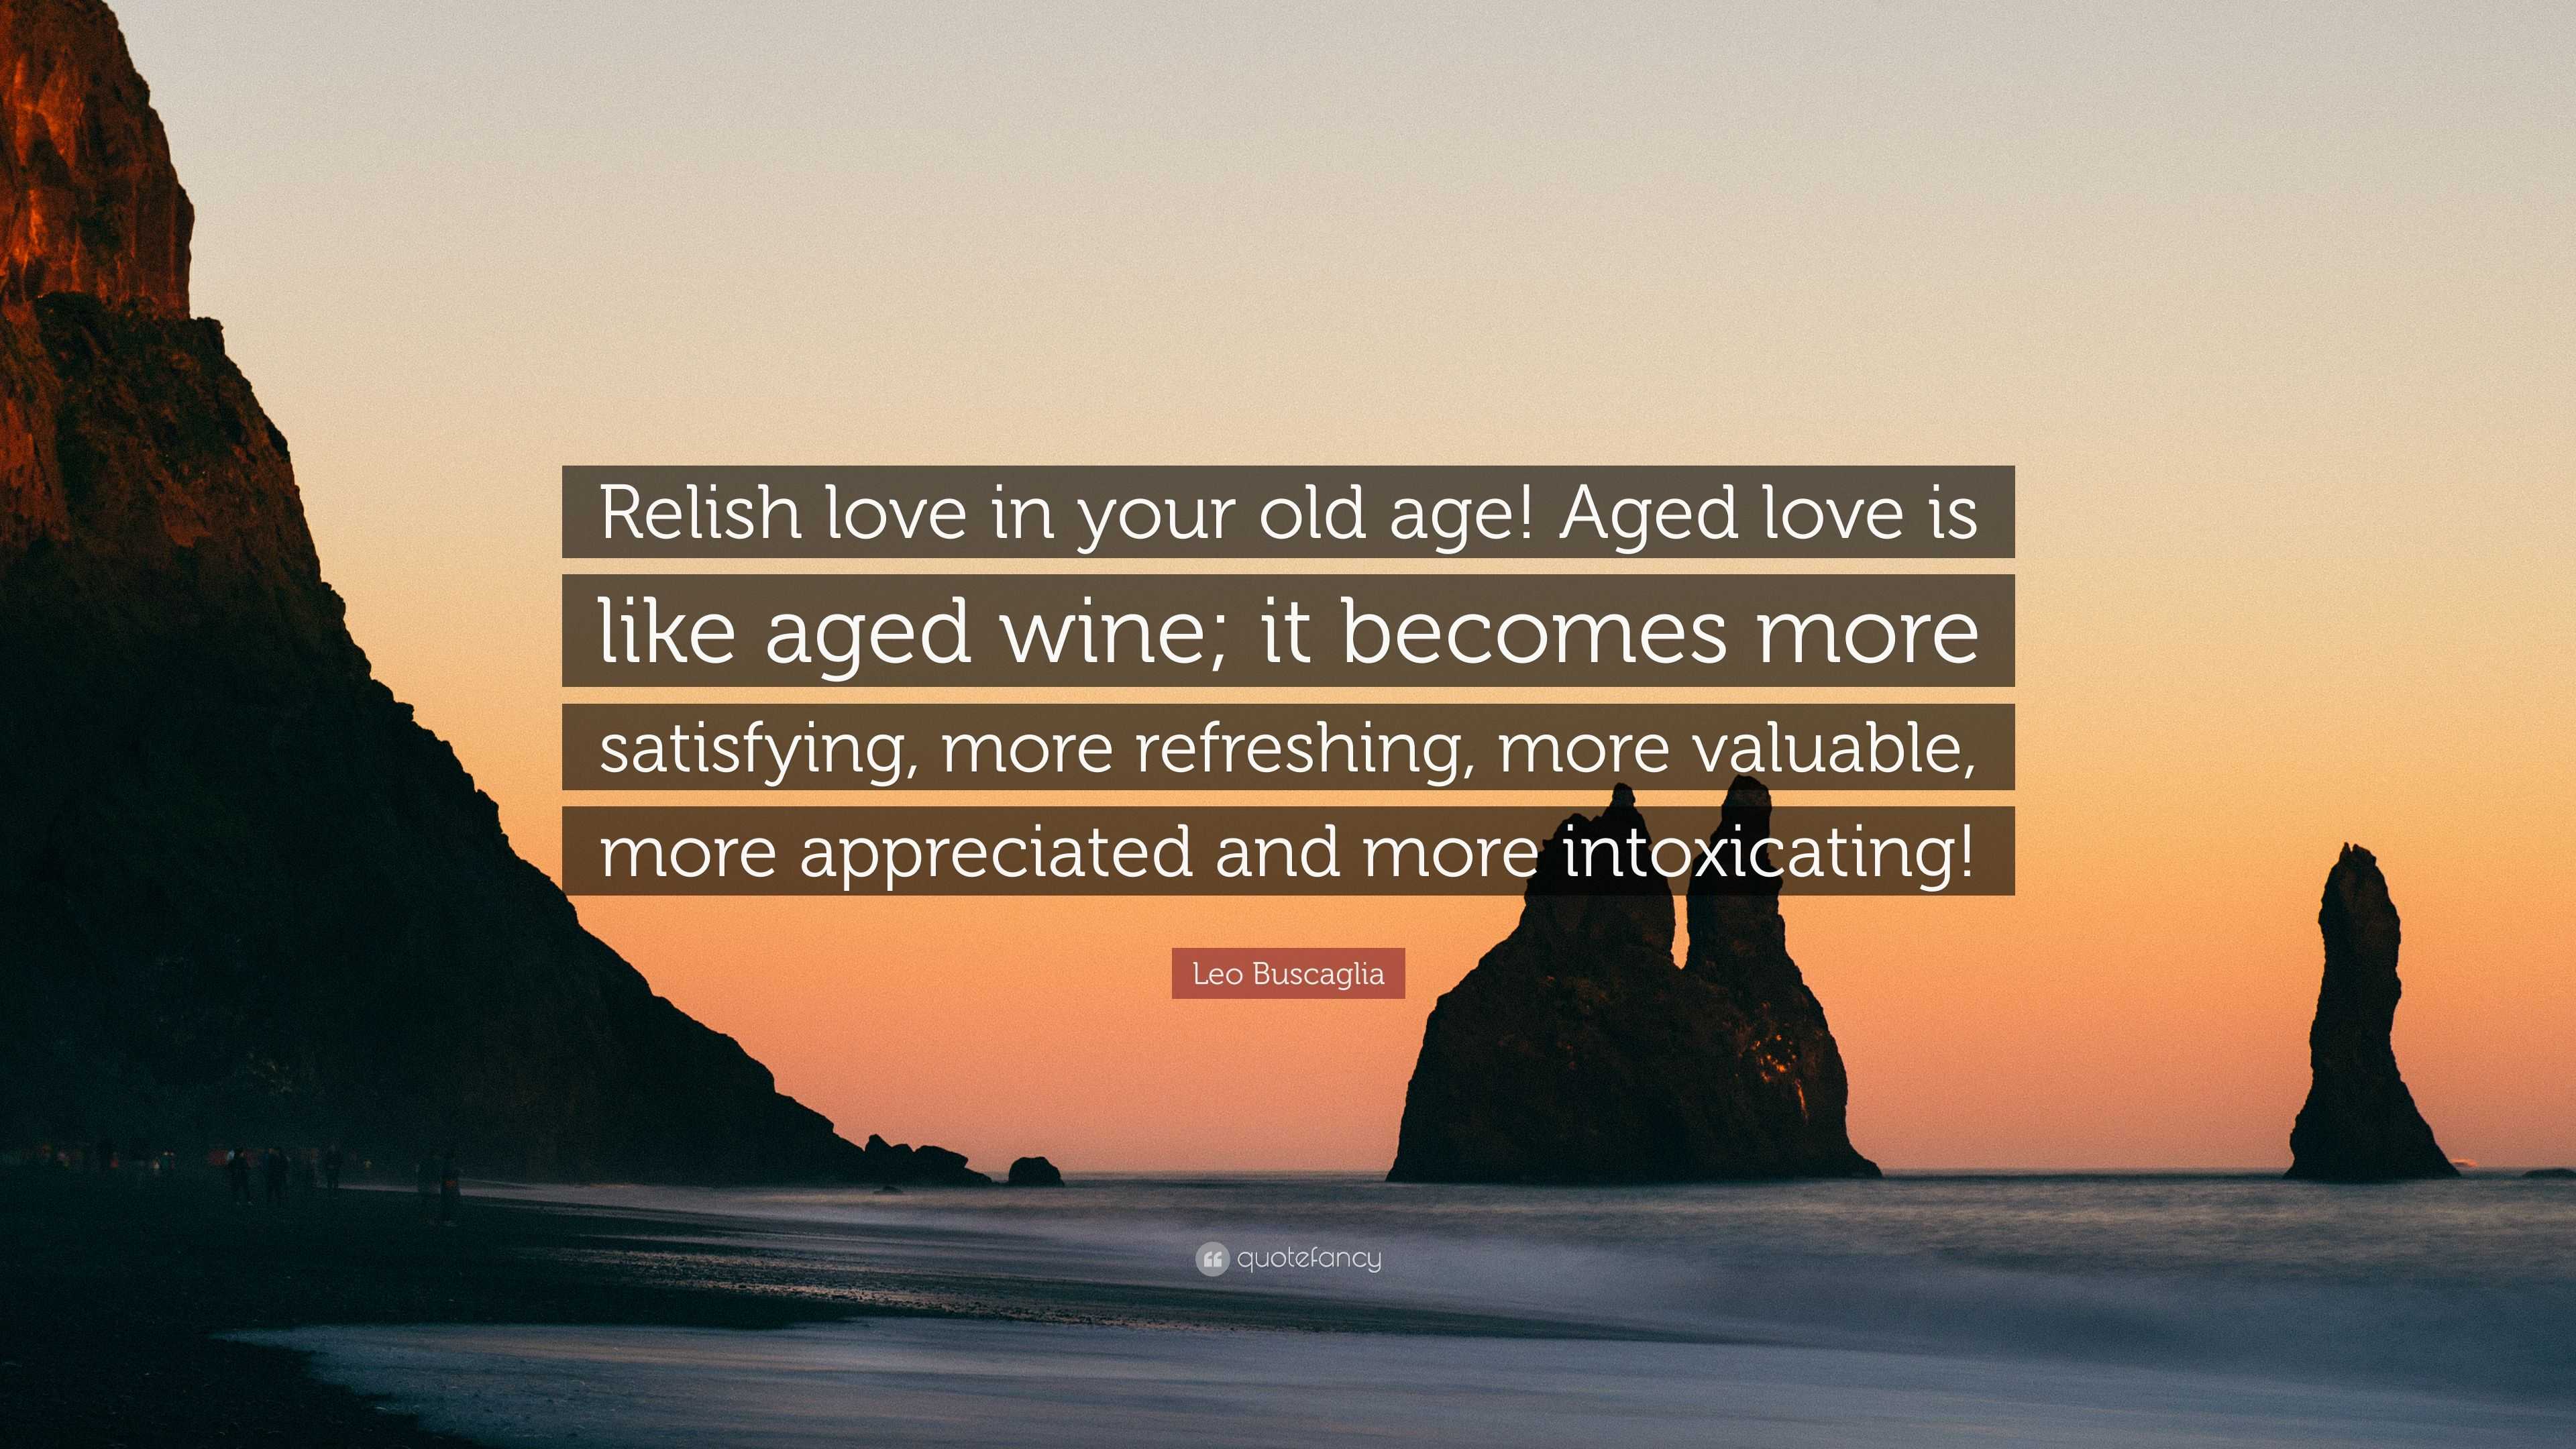 Leo Buscaglia Quote “Relish love in your old age Aged love is like